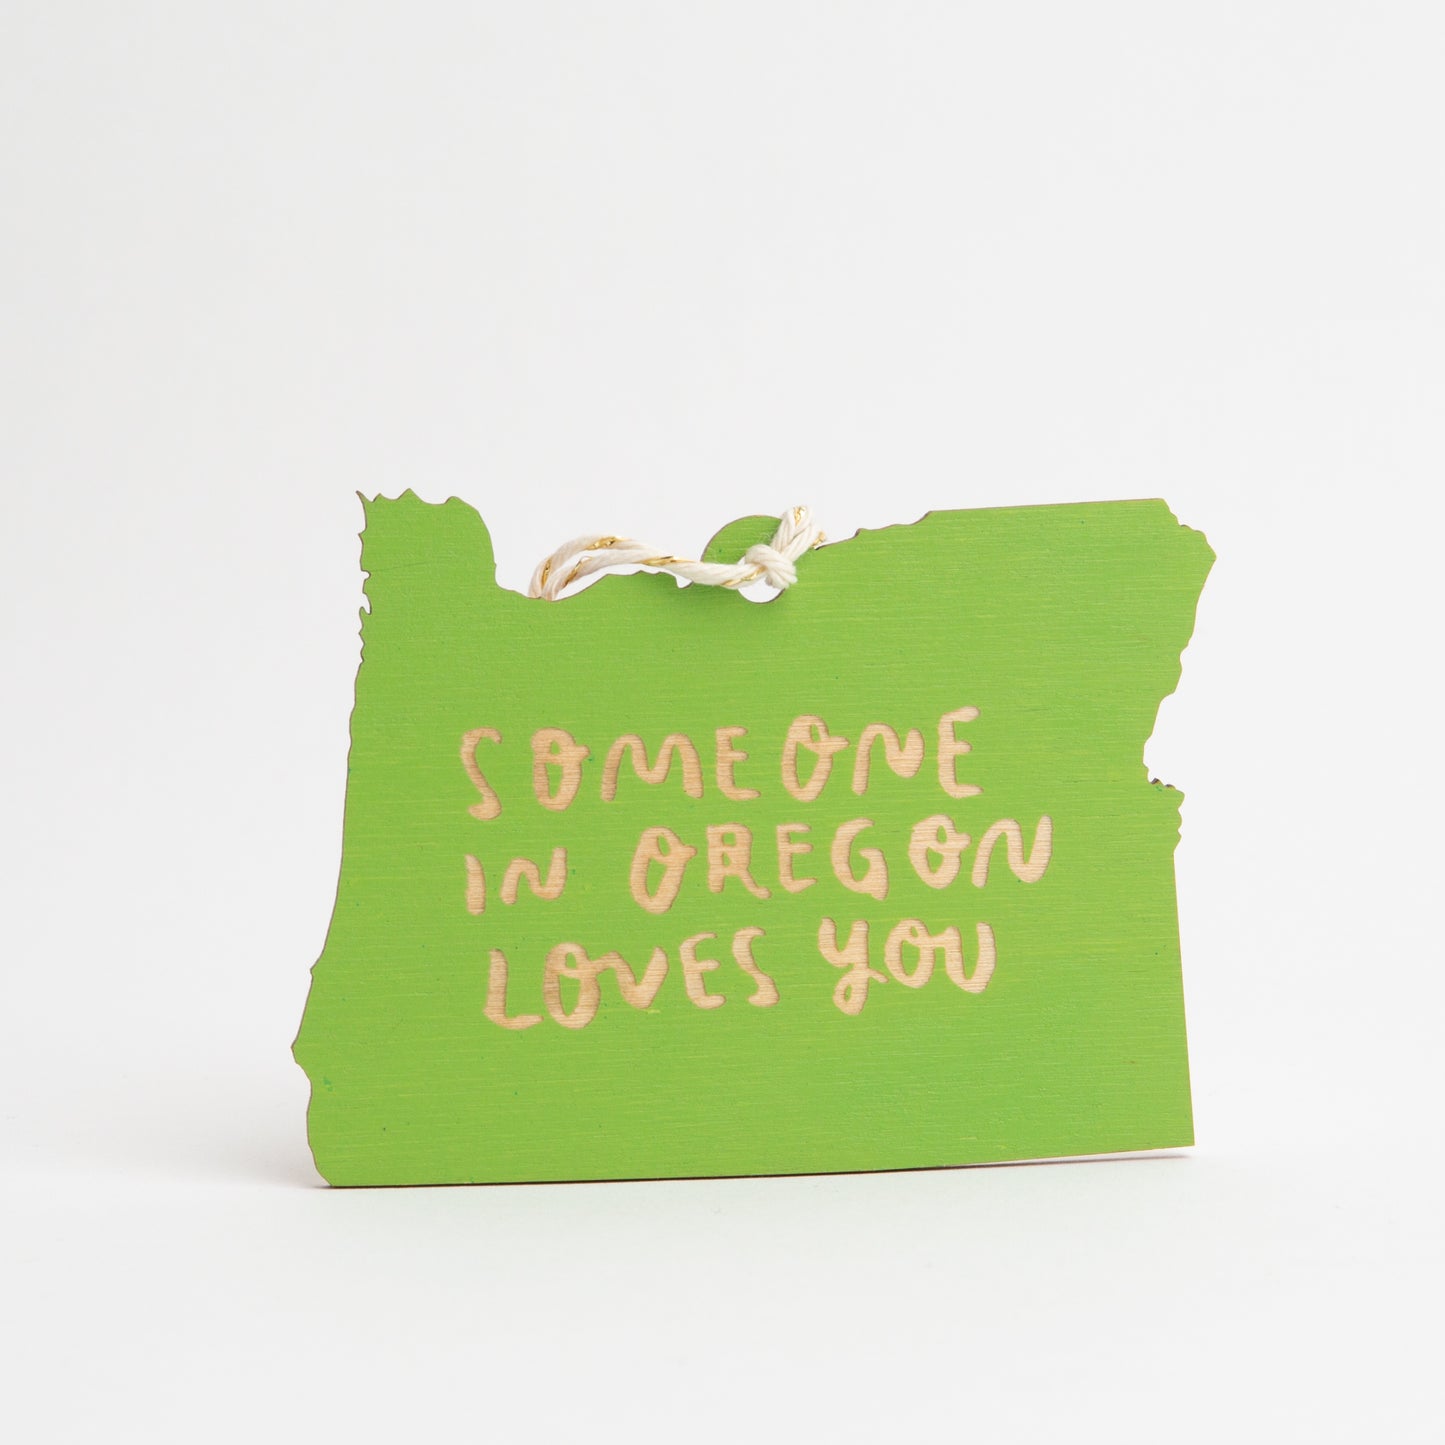 Someone In Oregon Loves You Ornament - Large